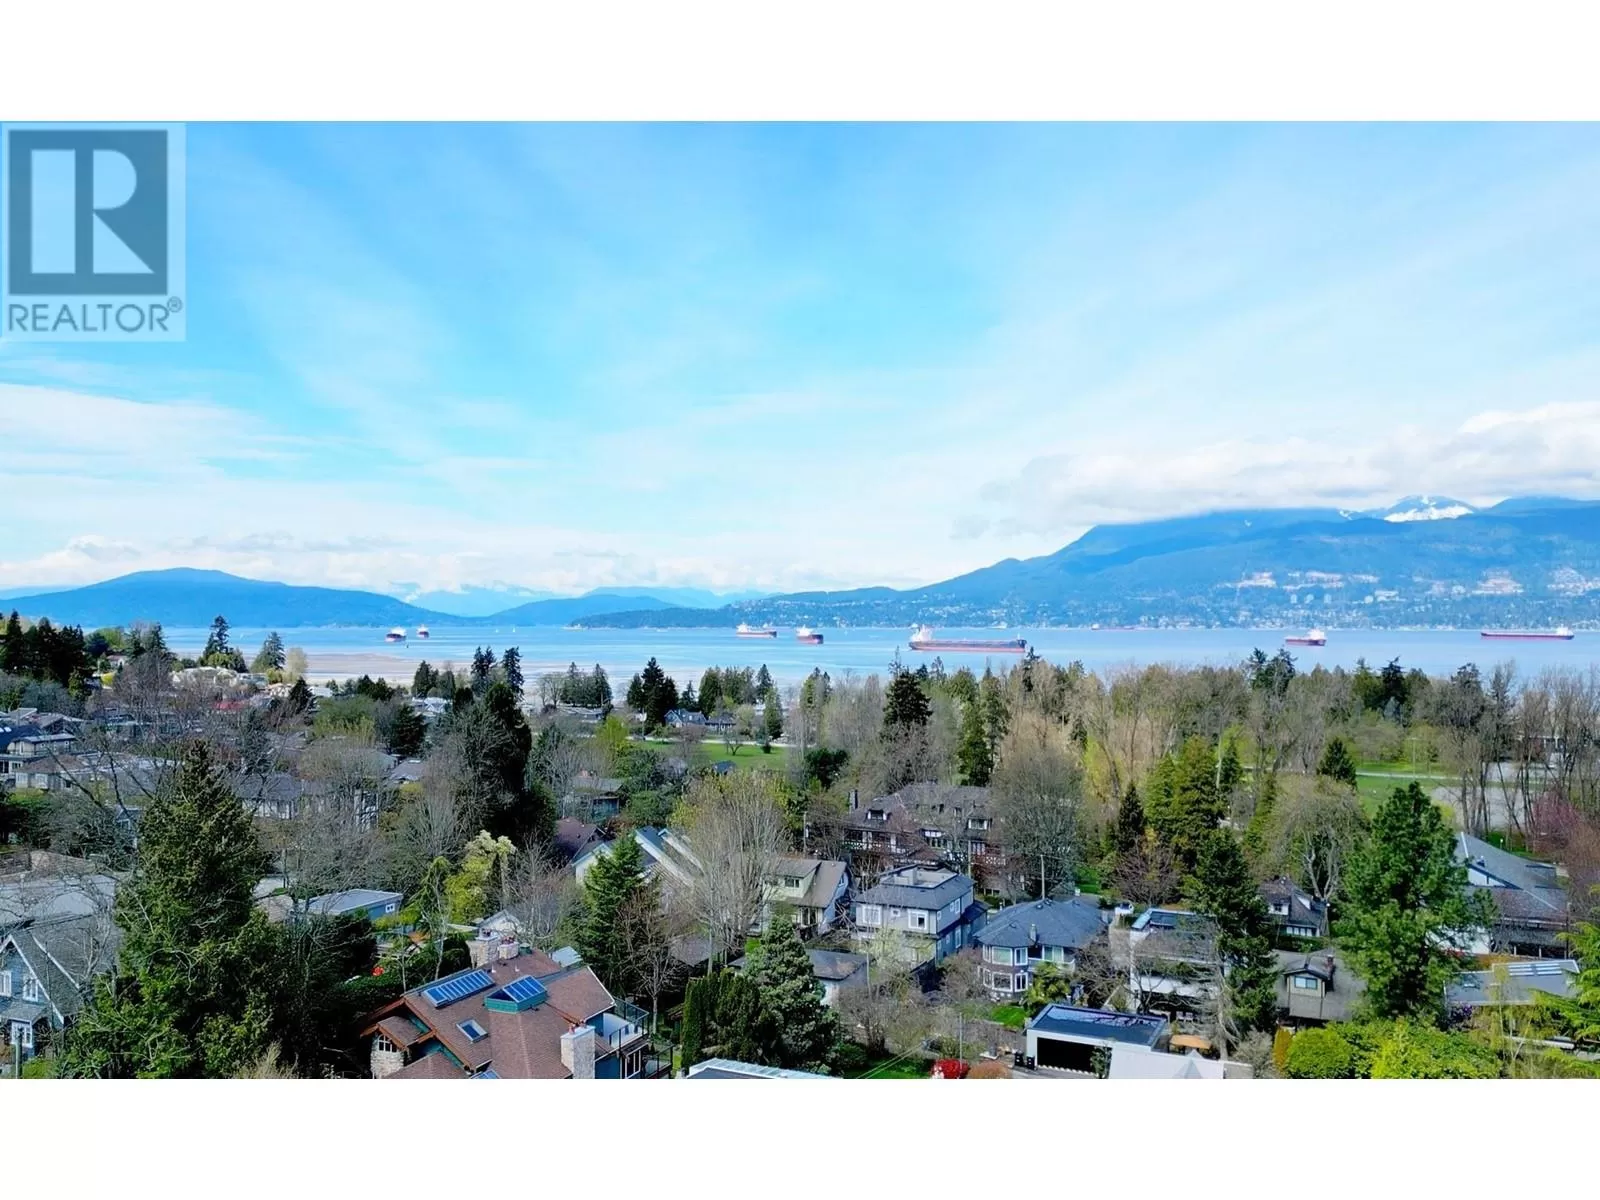 House for rent: 4350 Locarno Crescent, Vancouver, British Columbia V6R 1G3